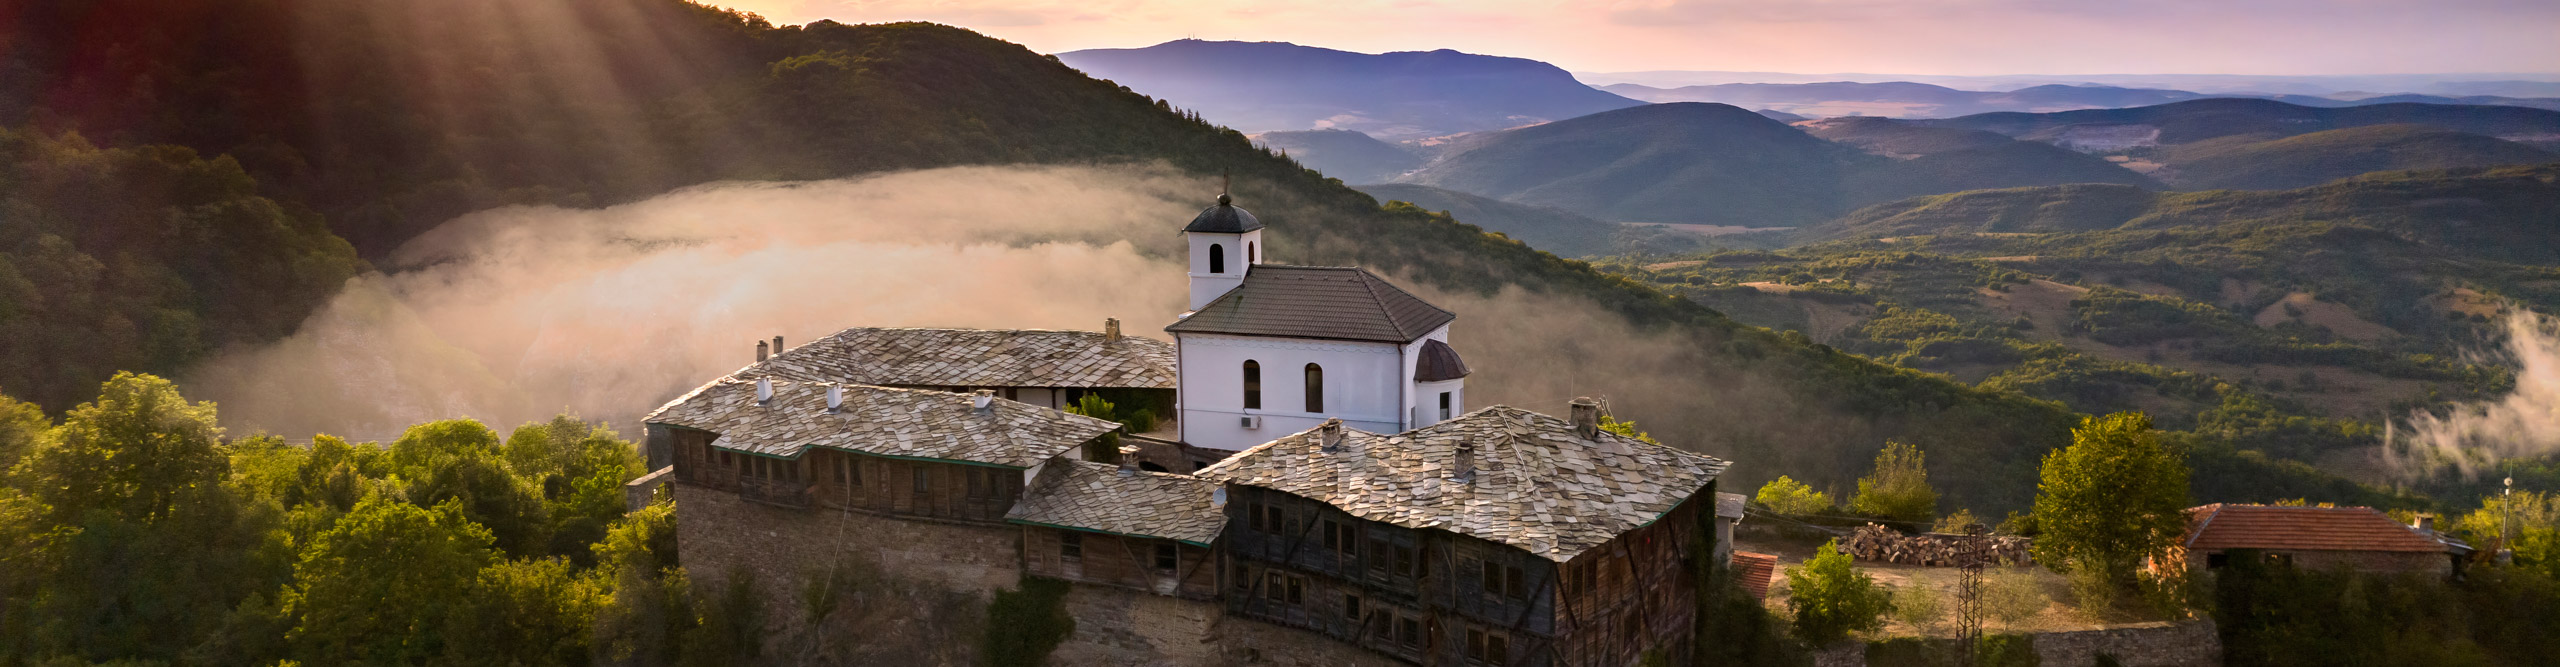 Aerial view of Medieval Glozhene Monastery of Saint George, Lovech region, Bulgaria at sunset